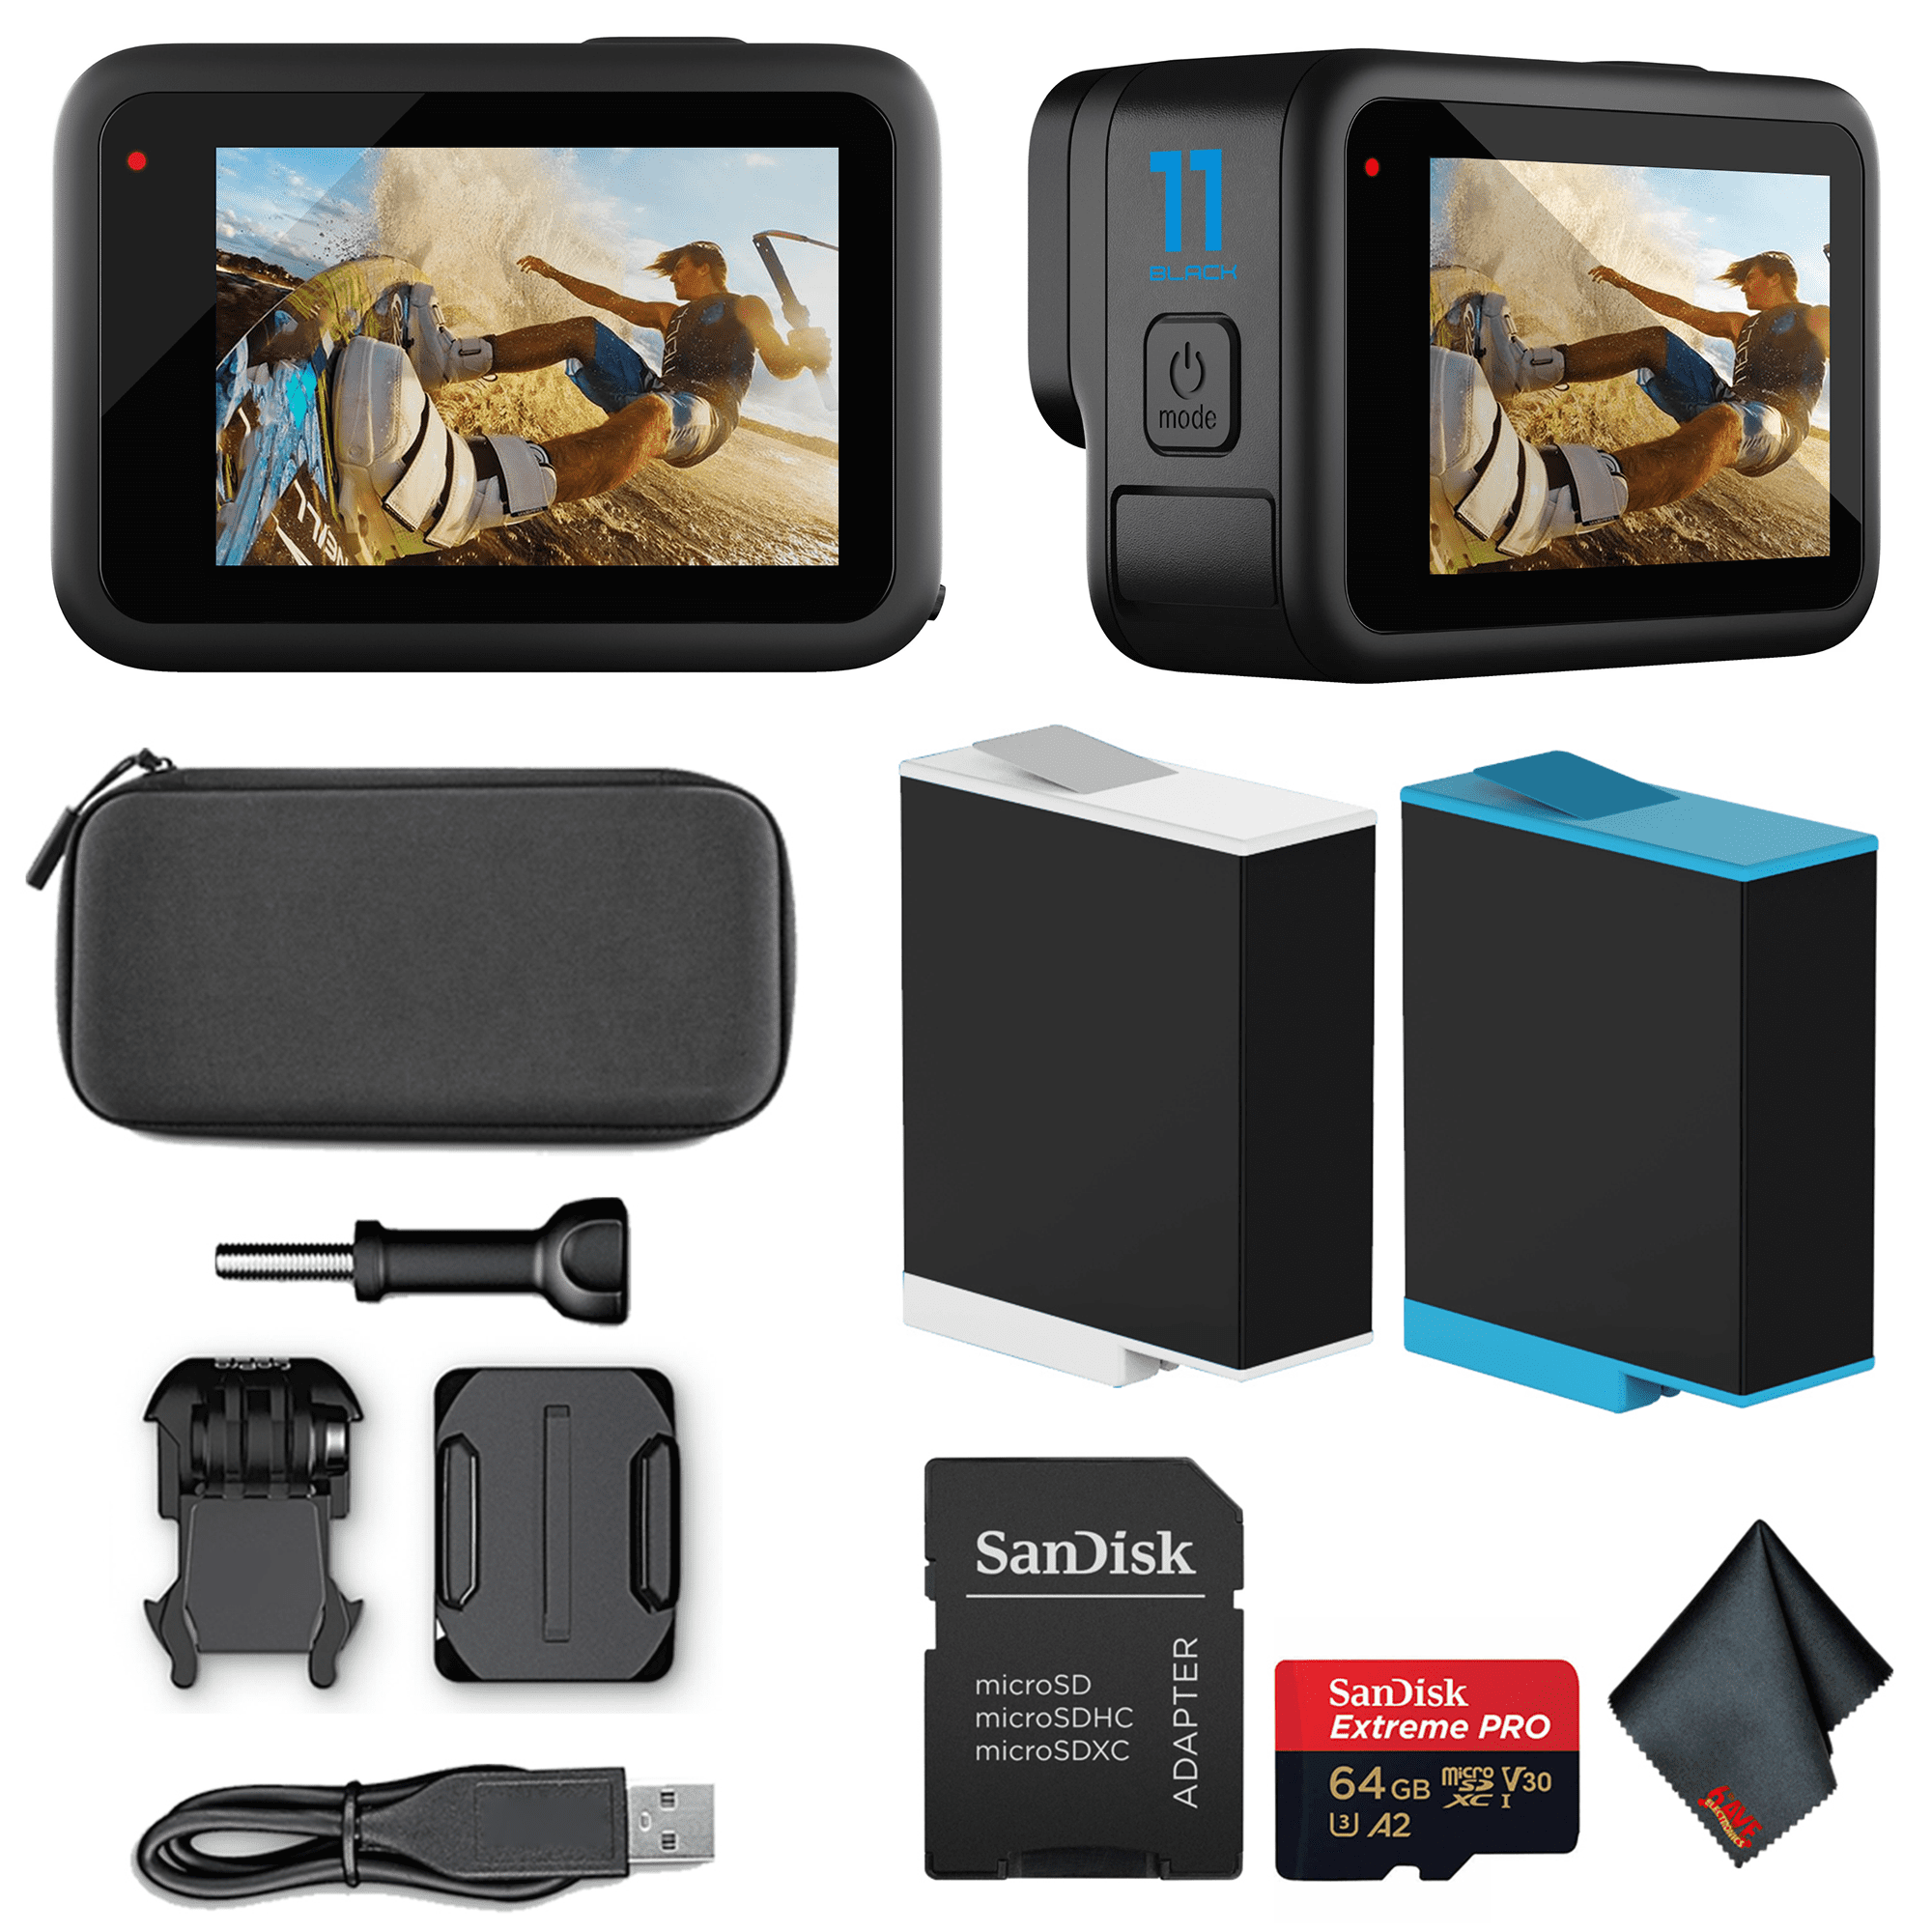 Ultimaxx Premium GoPro Hero 12 Bundle - Includes: 64GB Extreme microSD  Memory Card, Replacement Battery, 40M Underwater LED Light & Much More  (30pc Bundle) 